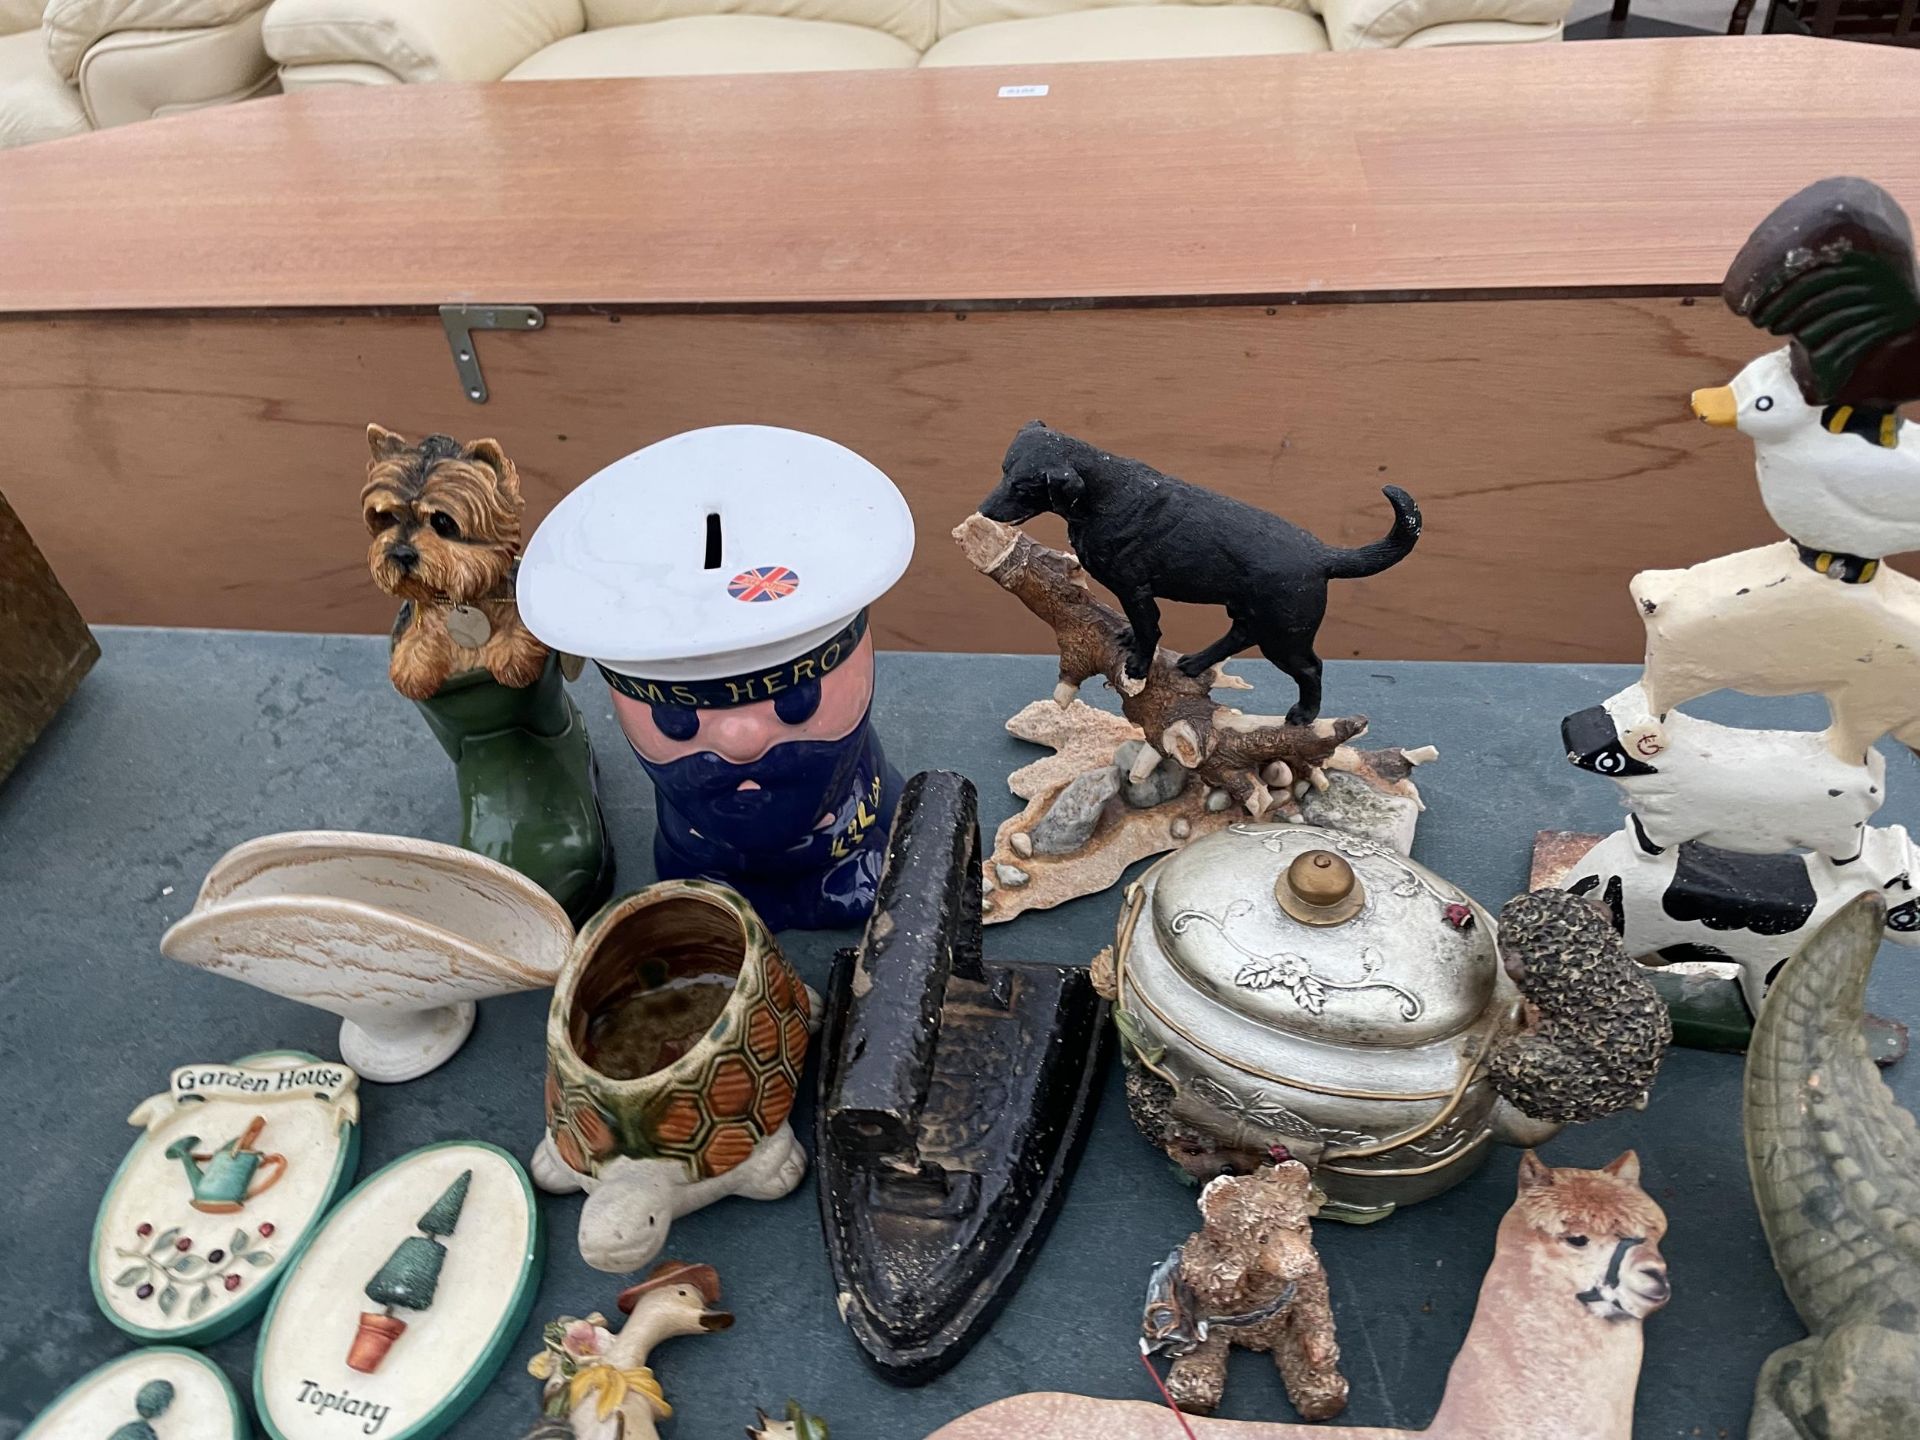 A LARGE ASSORTMENT OF ITEMS TO INCLUDE A VINTAGE FLAT IRON, BRASS MICE FIGURES AND A VINTAGE CAST - Image 2 of 3